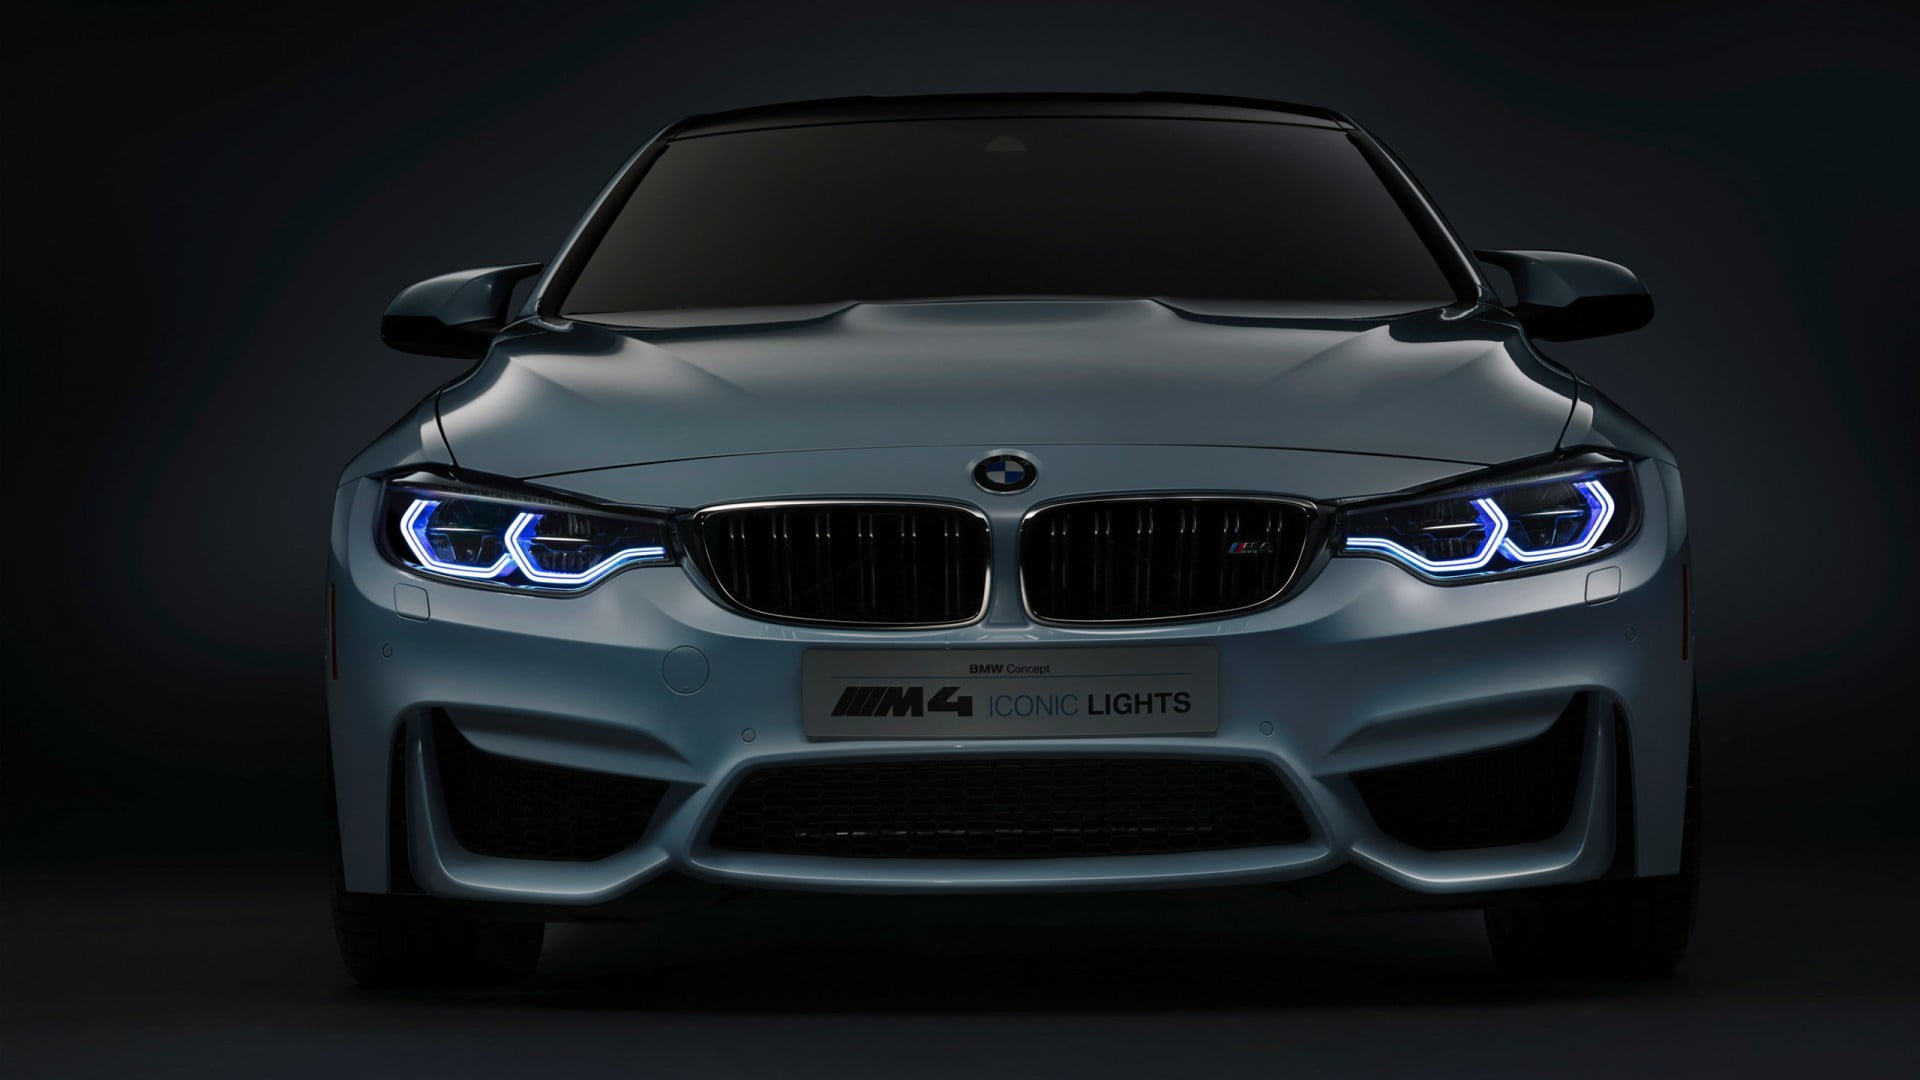 silver-colored BMW car, saloon cars, BMW M4 Coupe